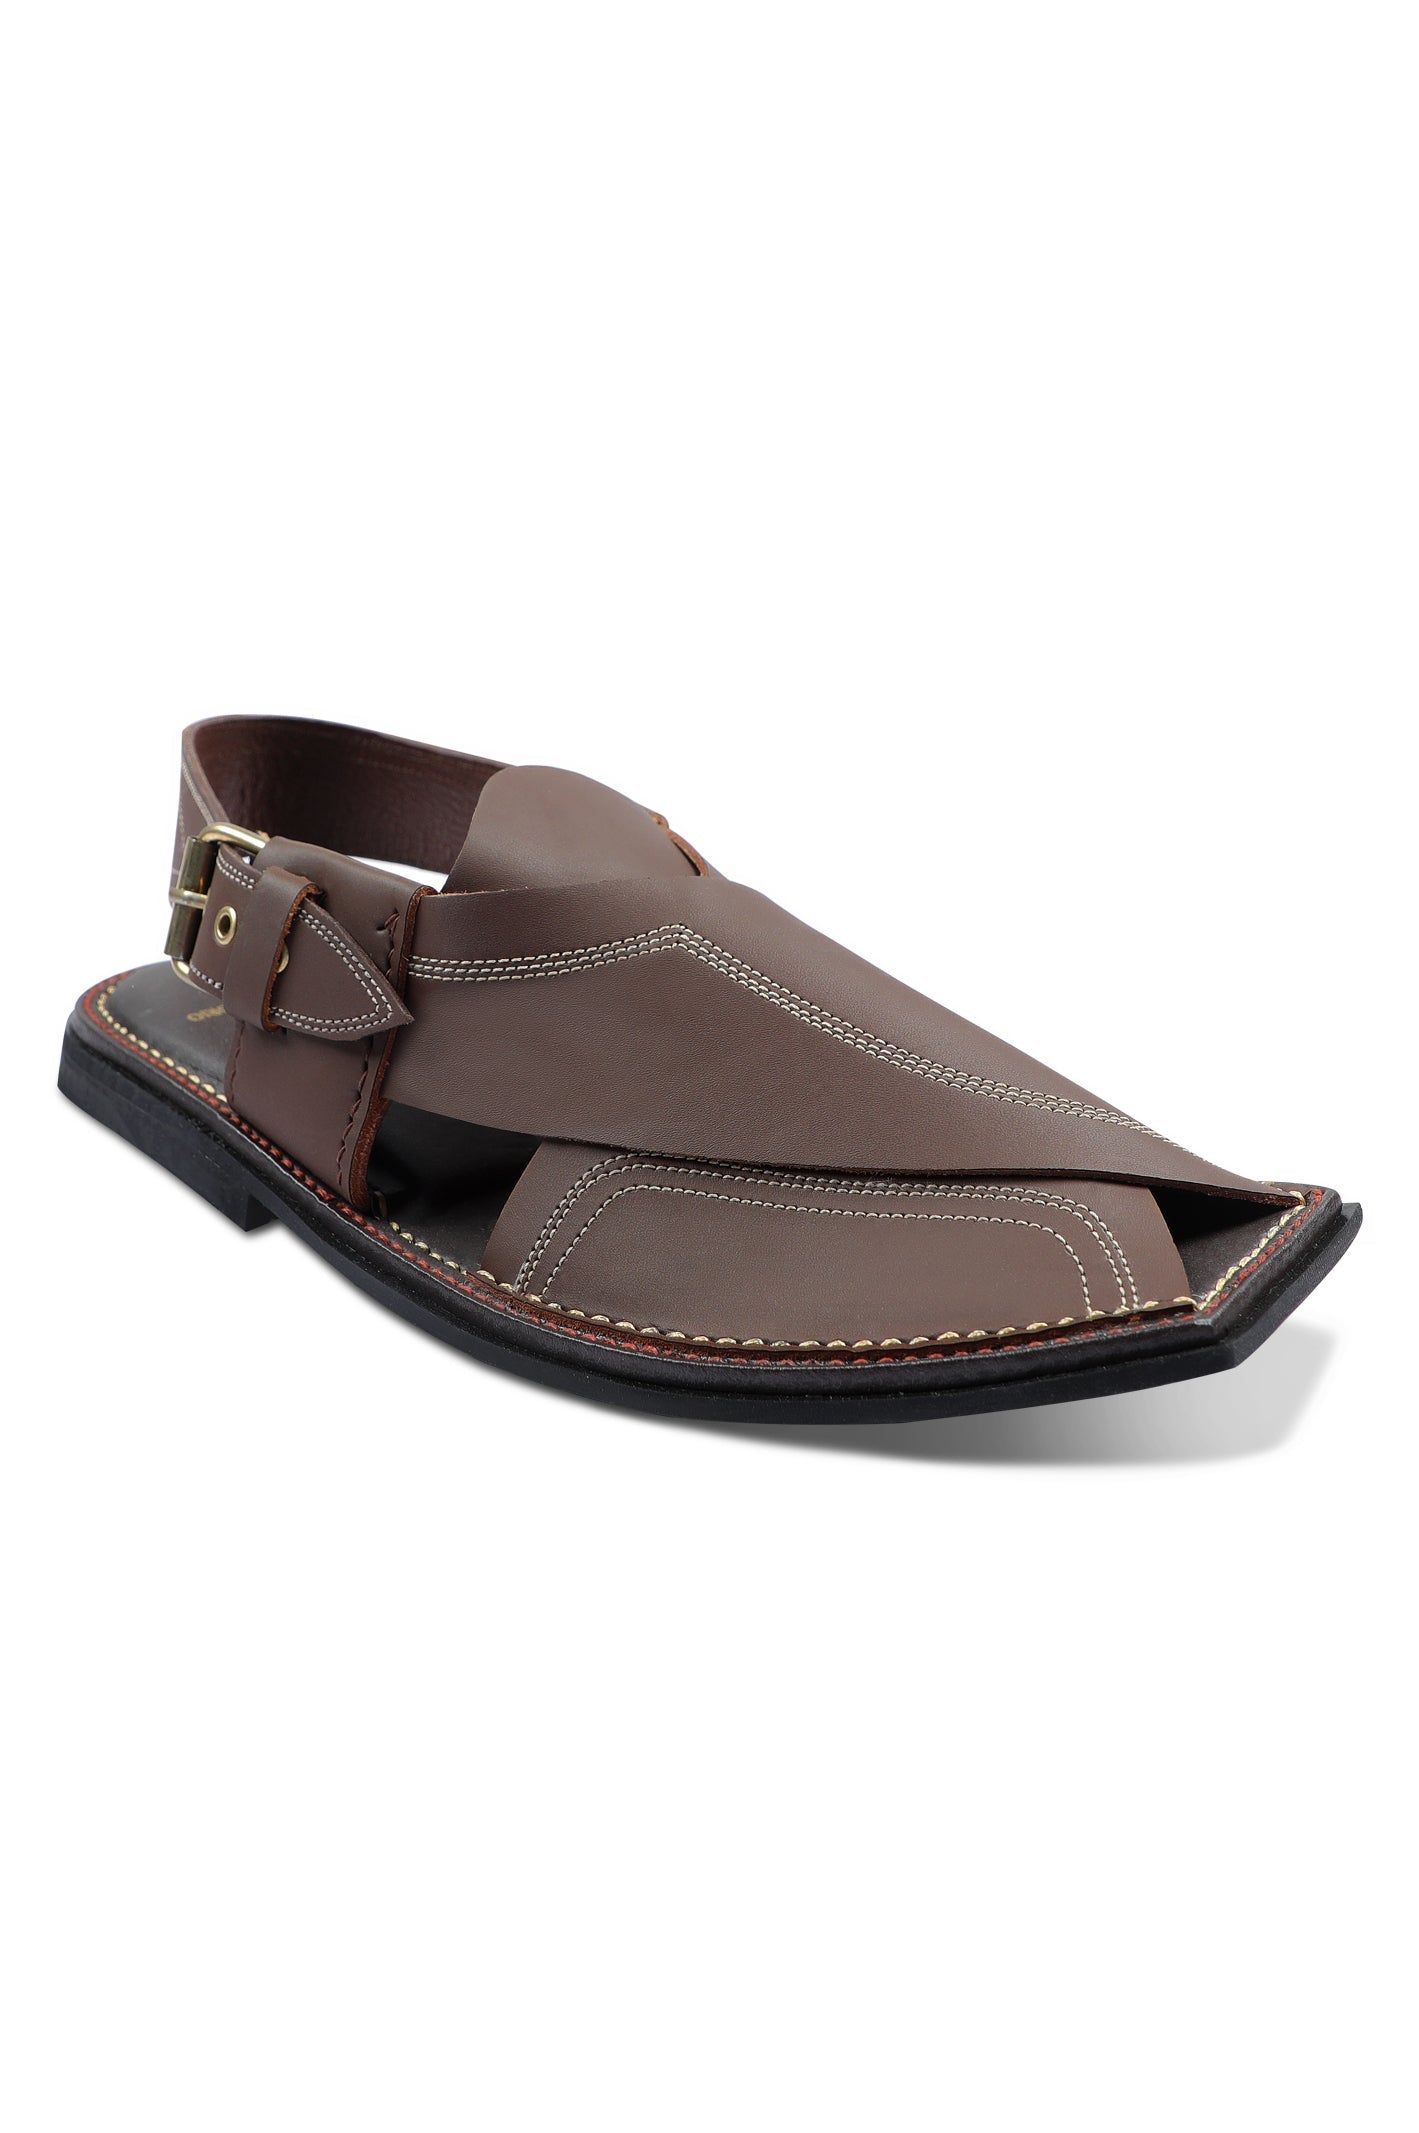 French Emporio Men Sandals SKU: PSLD-0029-COFFEE - Diners